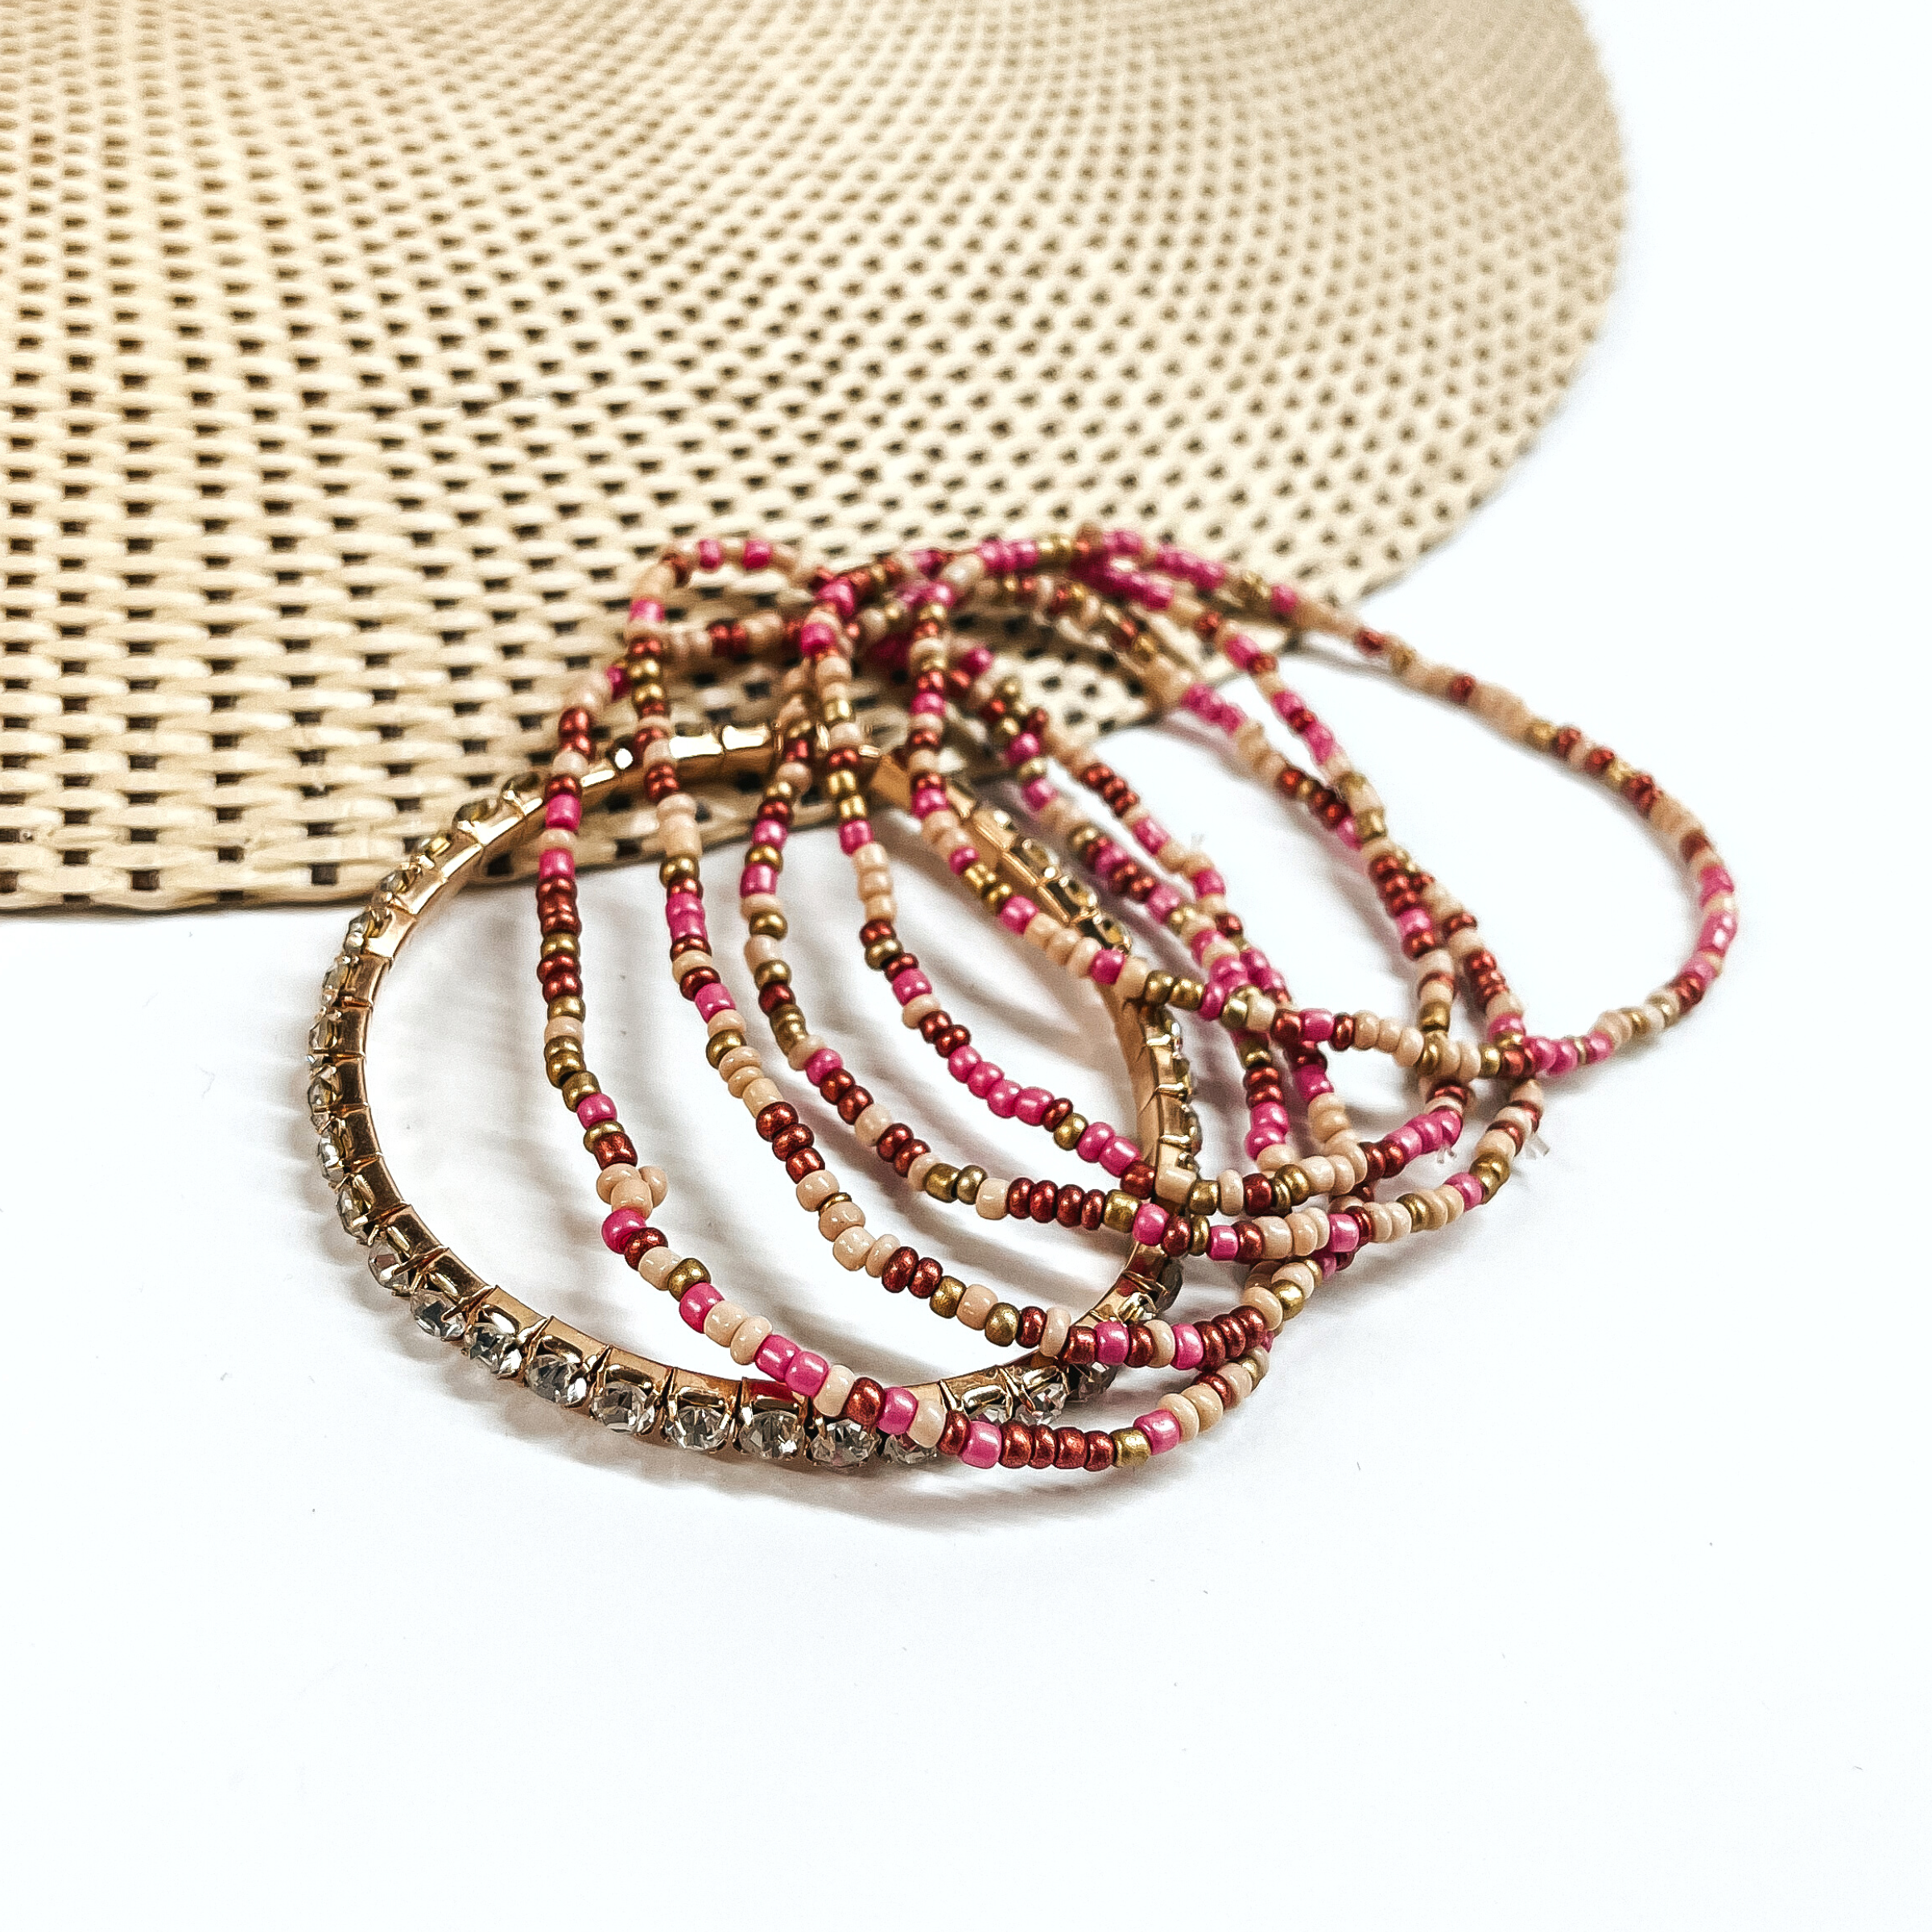 This is a set of six bracelets in a gold/champagne mix  There are five seedbeaded bracelets in champagne, rose gold, gold, and pink.  There is a one clear rhinestone bracelet in a gold setting.  These bracelets are laying partly on a straw hat and a white background.